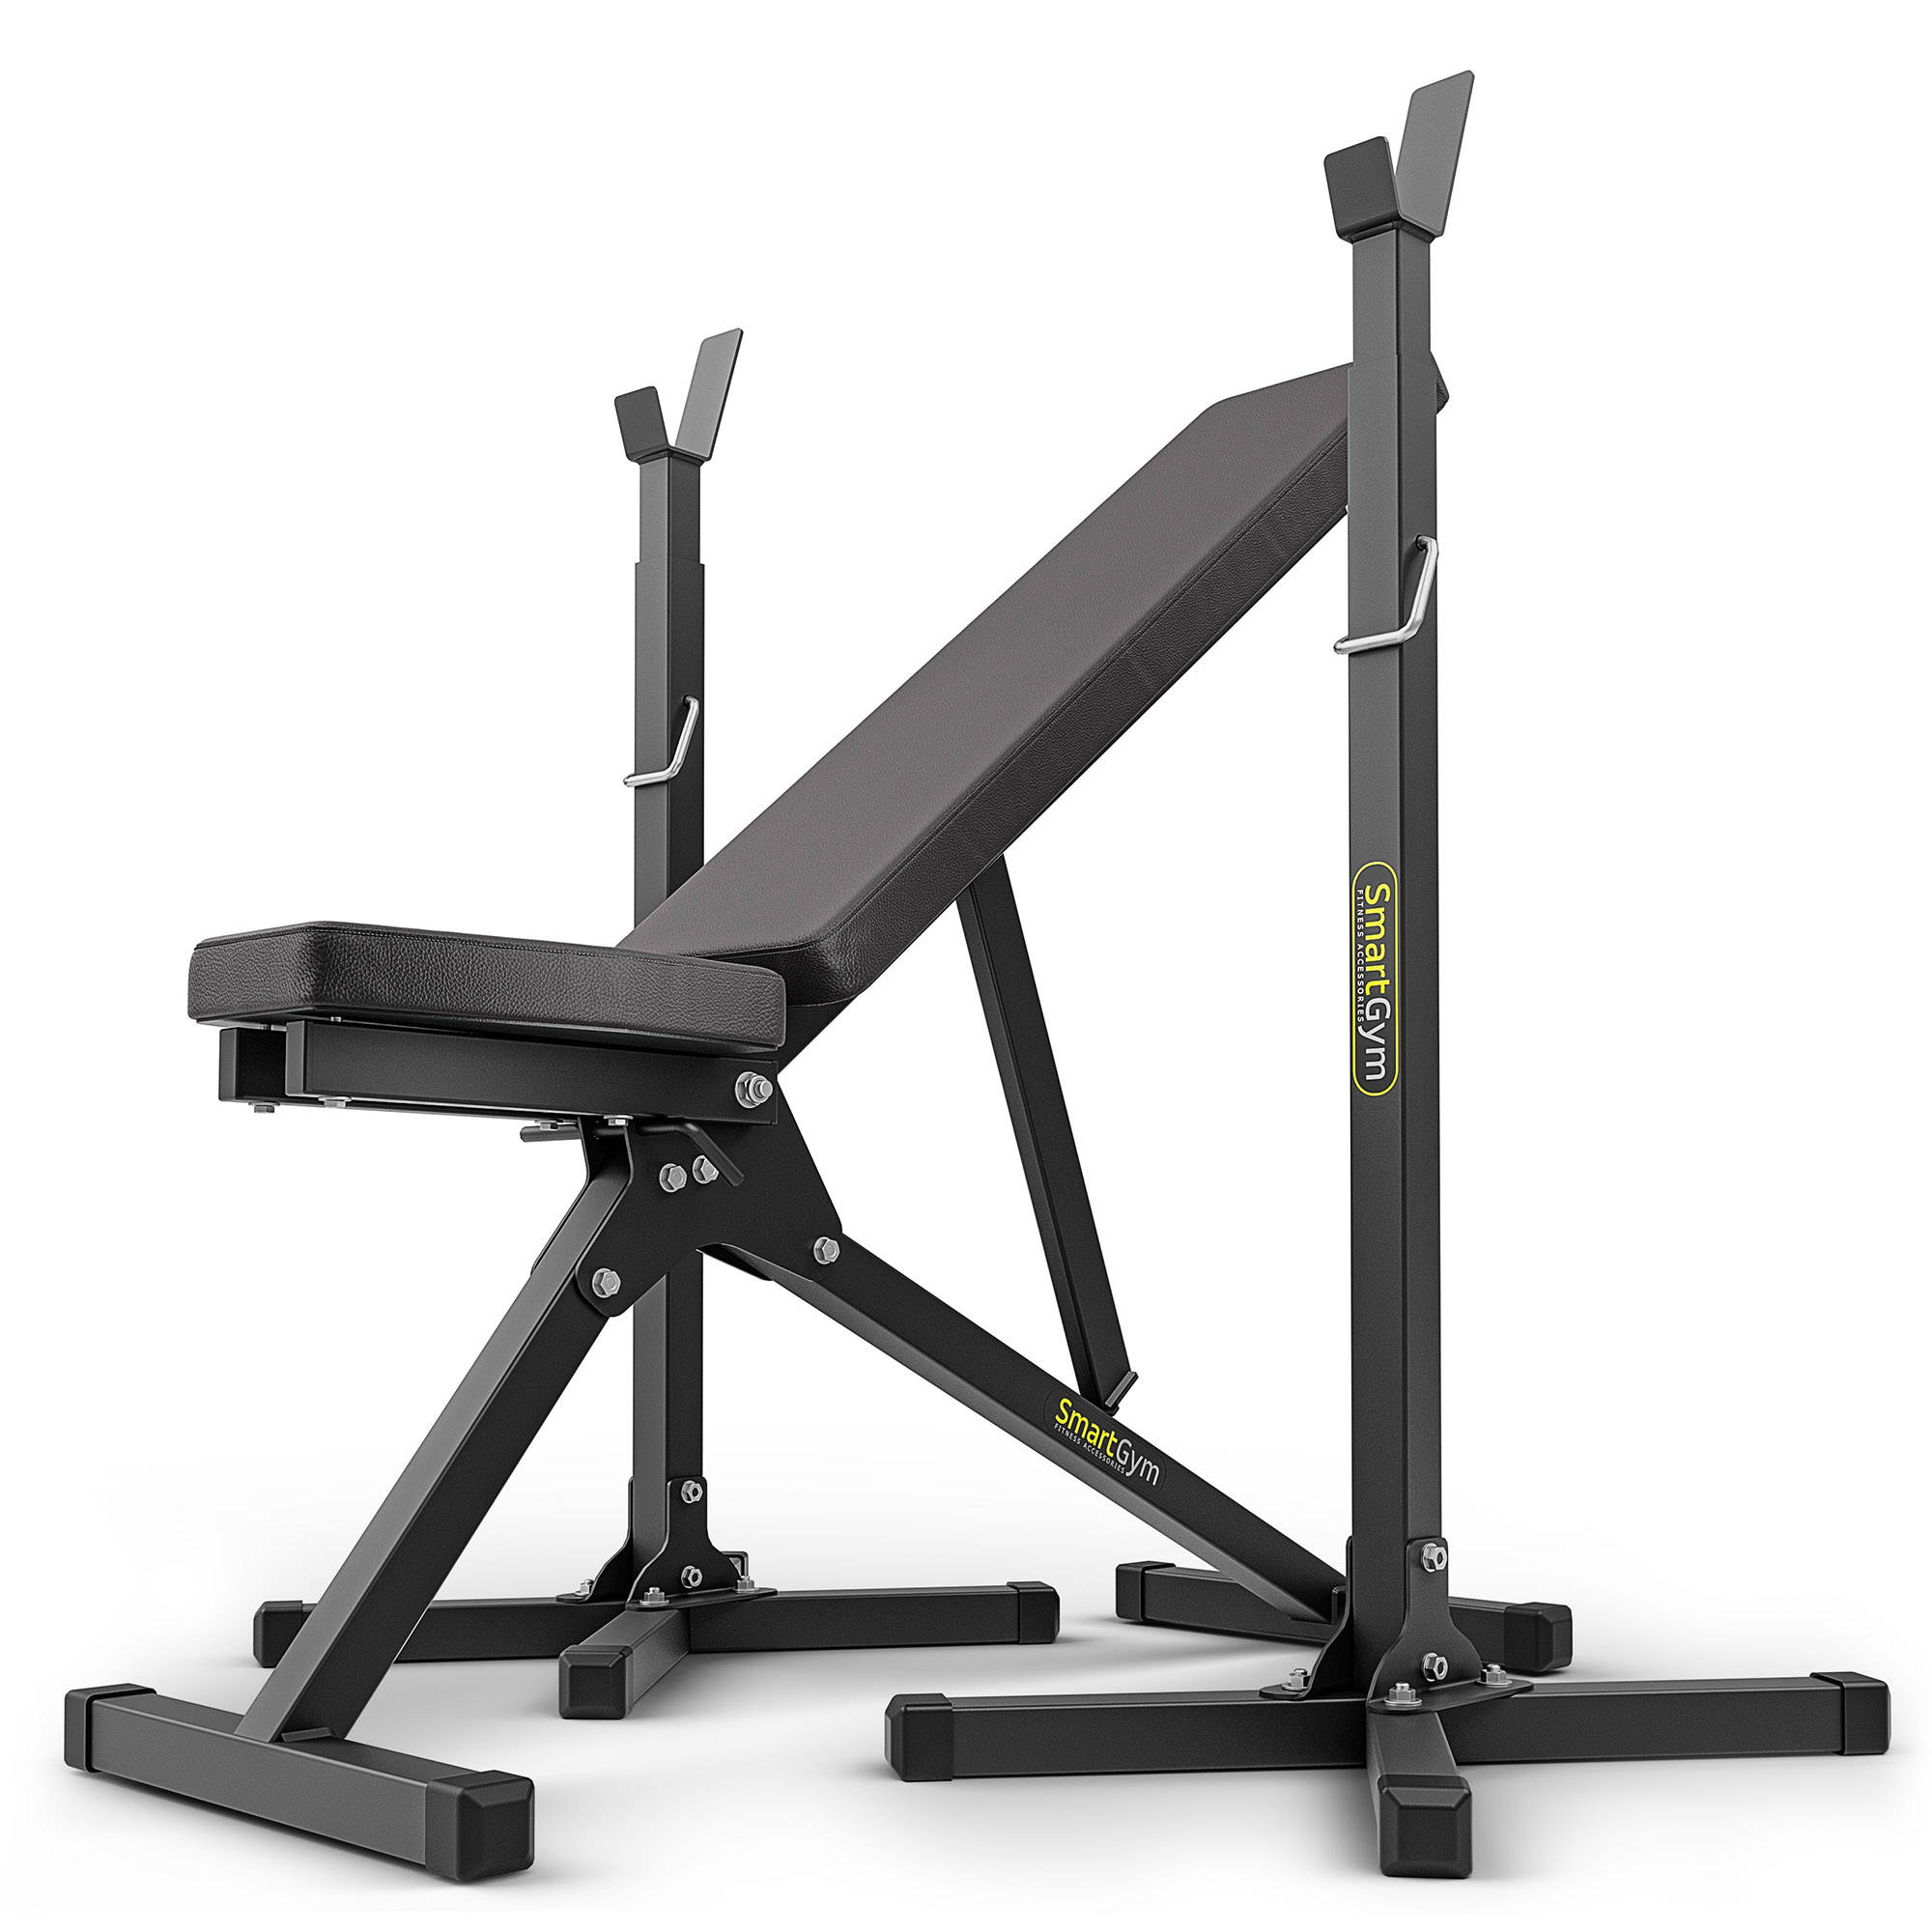 Adjustable bench SG-11 - SmartGym Fitness Accessories